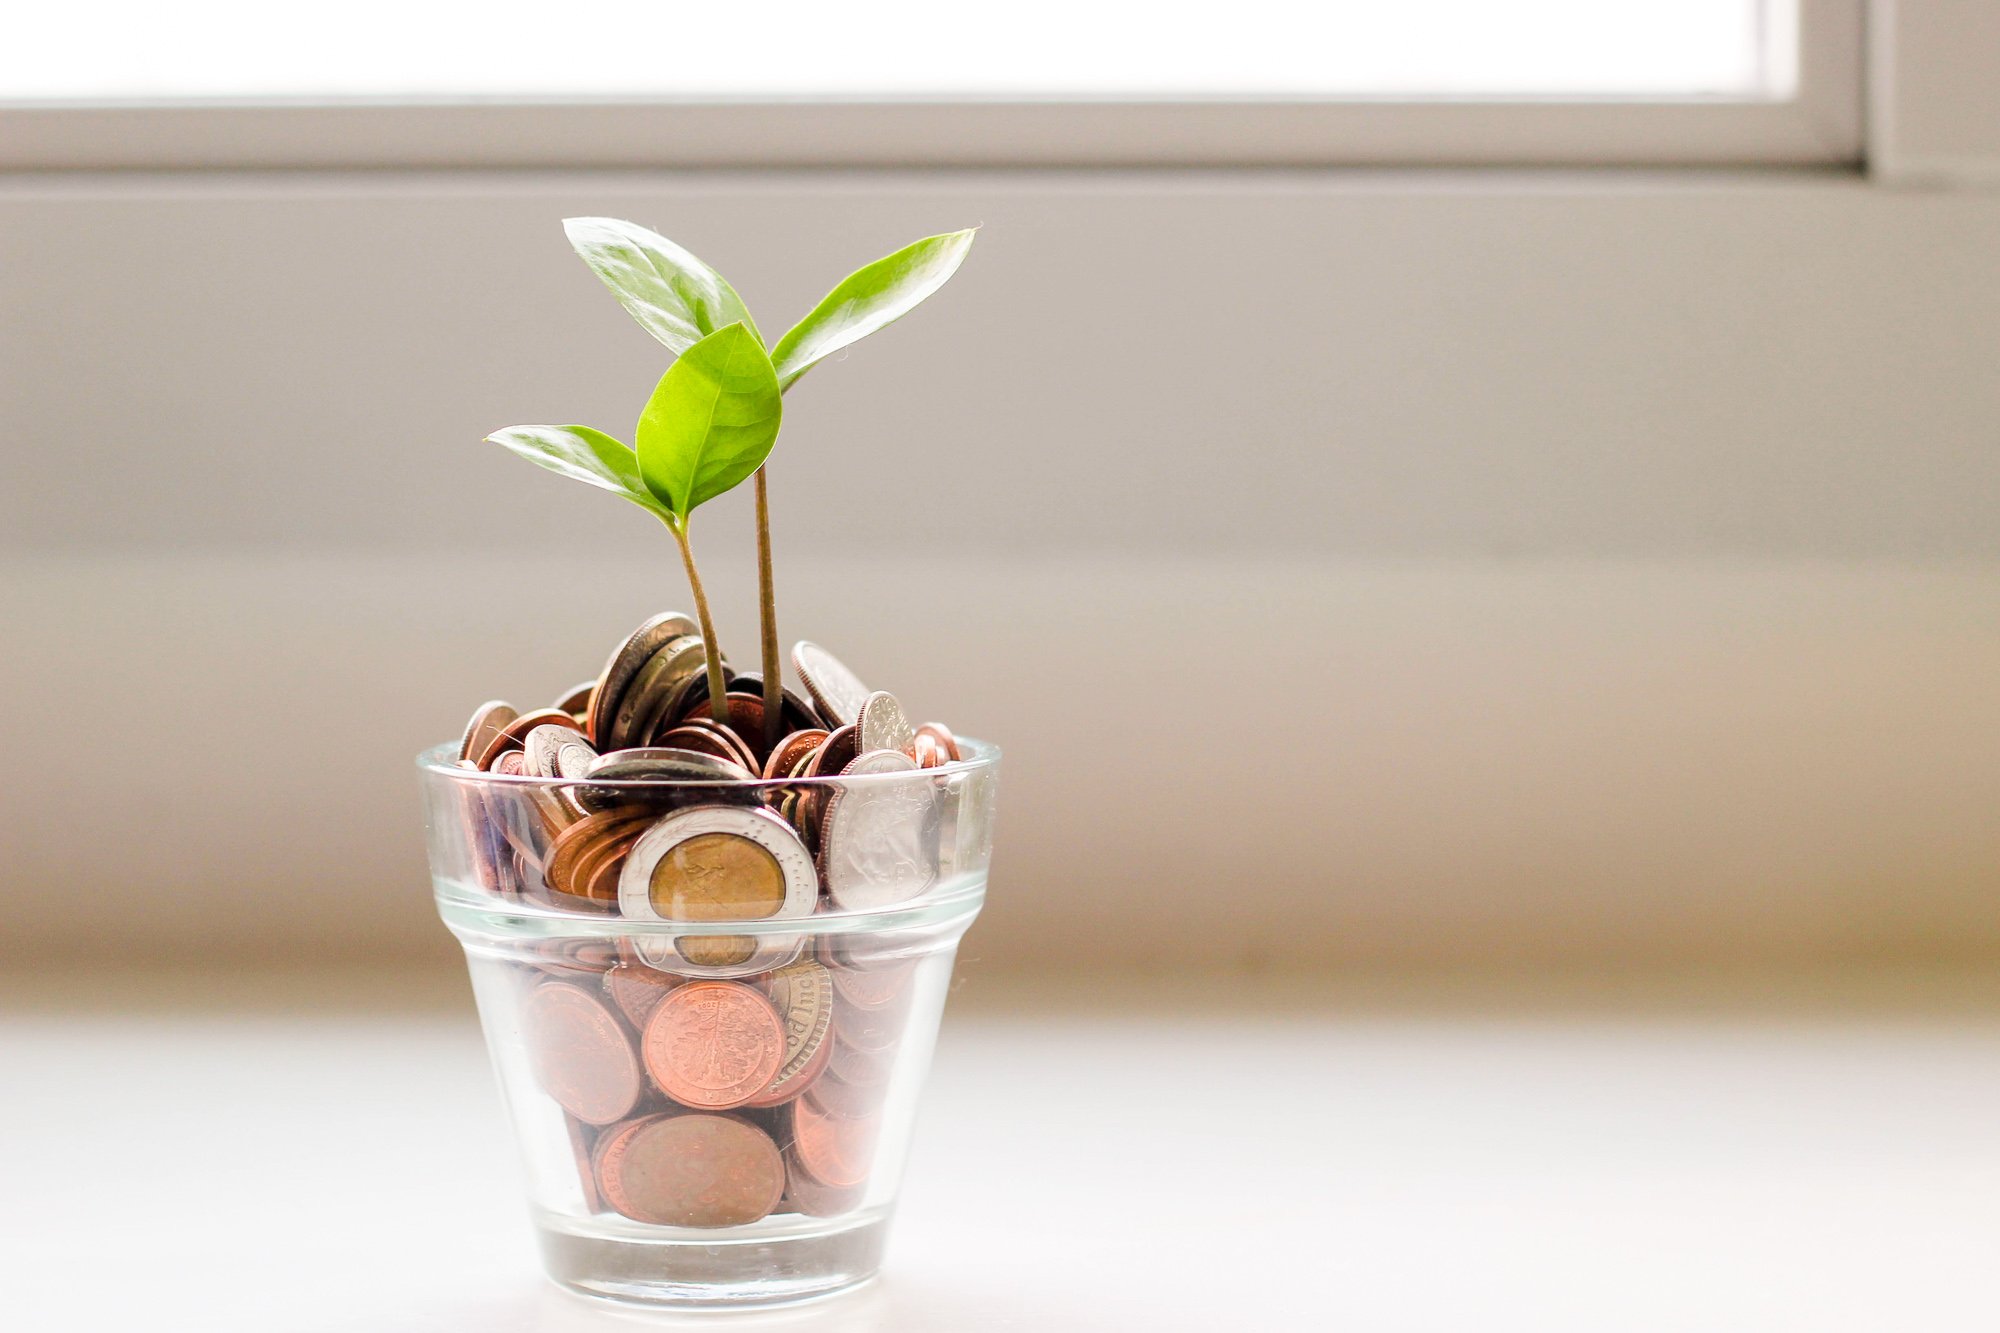 A small glass on a windowsill filled with coins and a sprouting plant